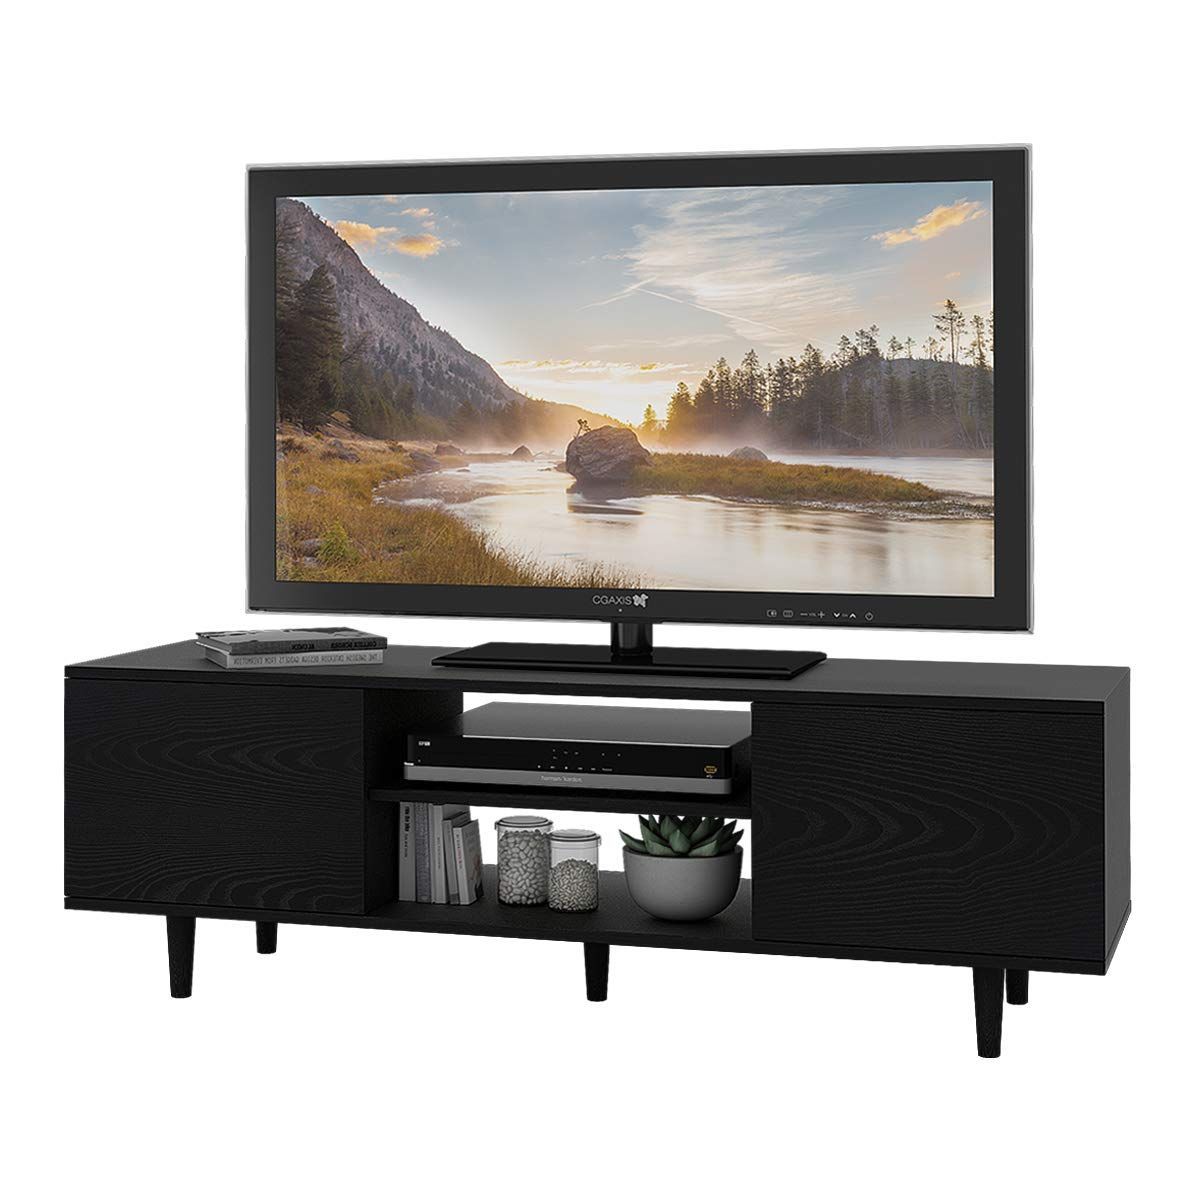 Pin On Tv Stands & Luxury Home Furniture Ideas Regarding Luxury Tv Stands (View 4 of 15)